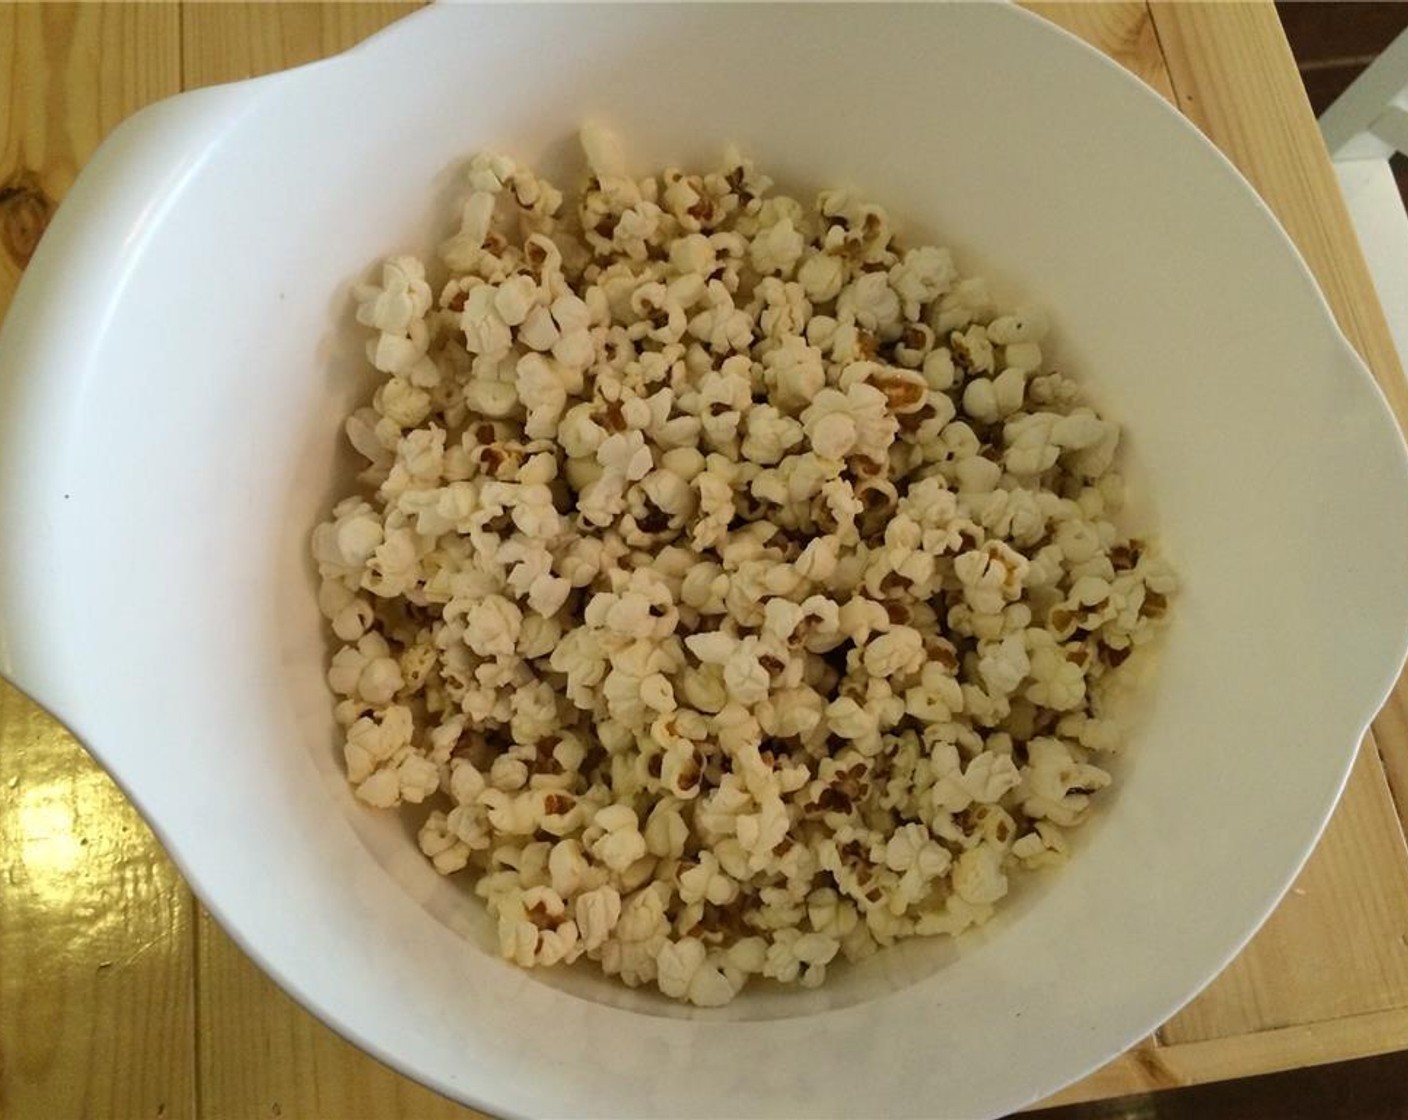 step 9 Pour the popcorn into a bowl and season with Salt (to taste). If you'd like, drizzle with Olive Oil (to taste). Then shake vigorously so the popcorn is evenly coated.